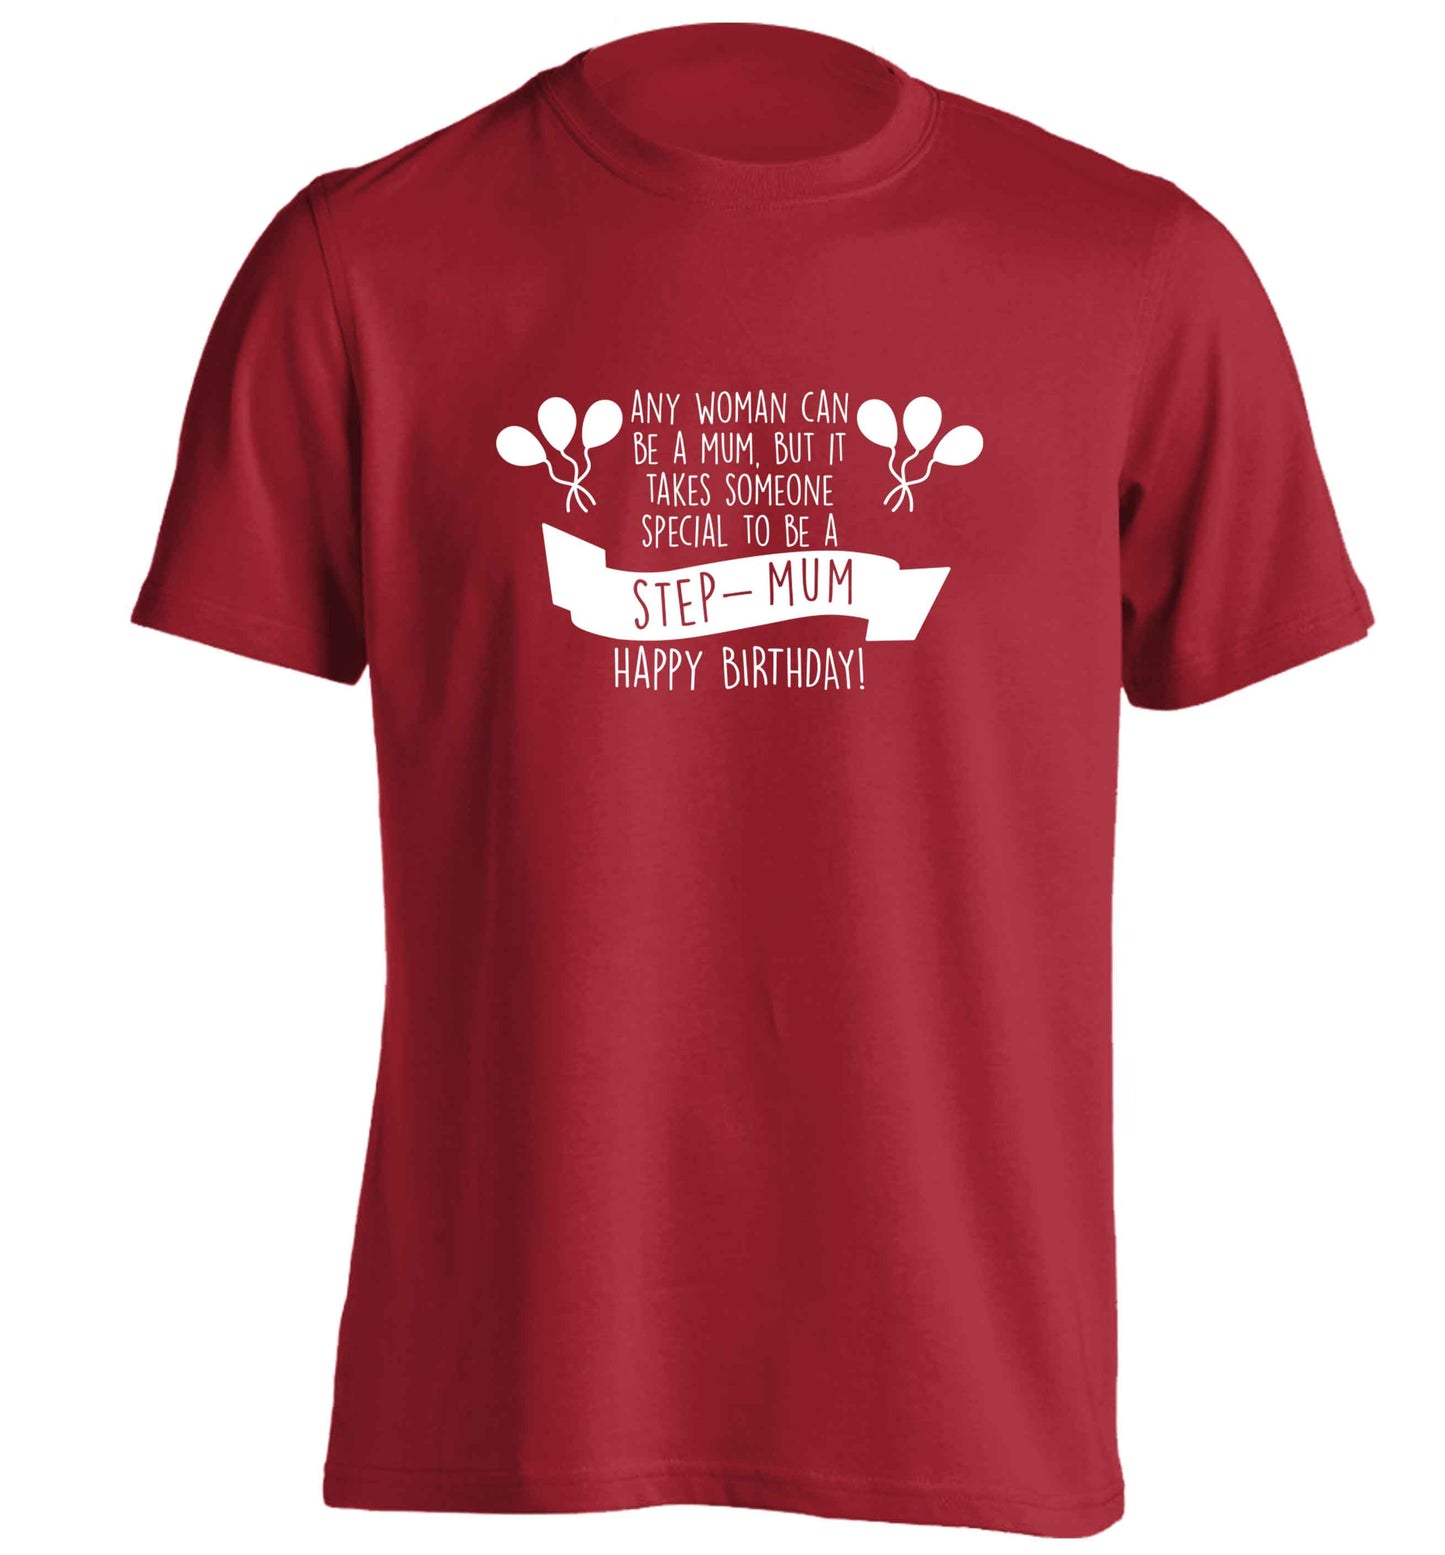 Takes someone special to be a step-mum, happy birthday! adults unisex red Tshirt 2XL